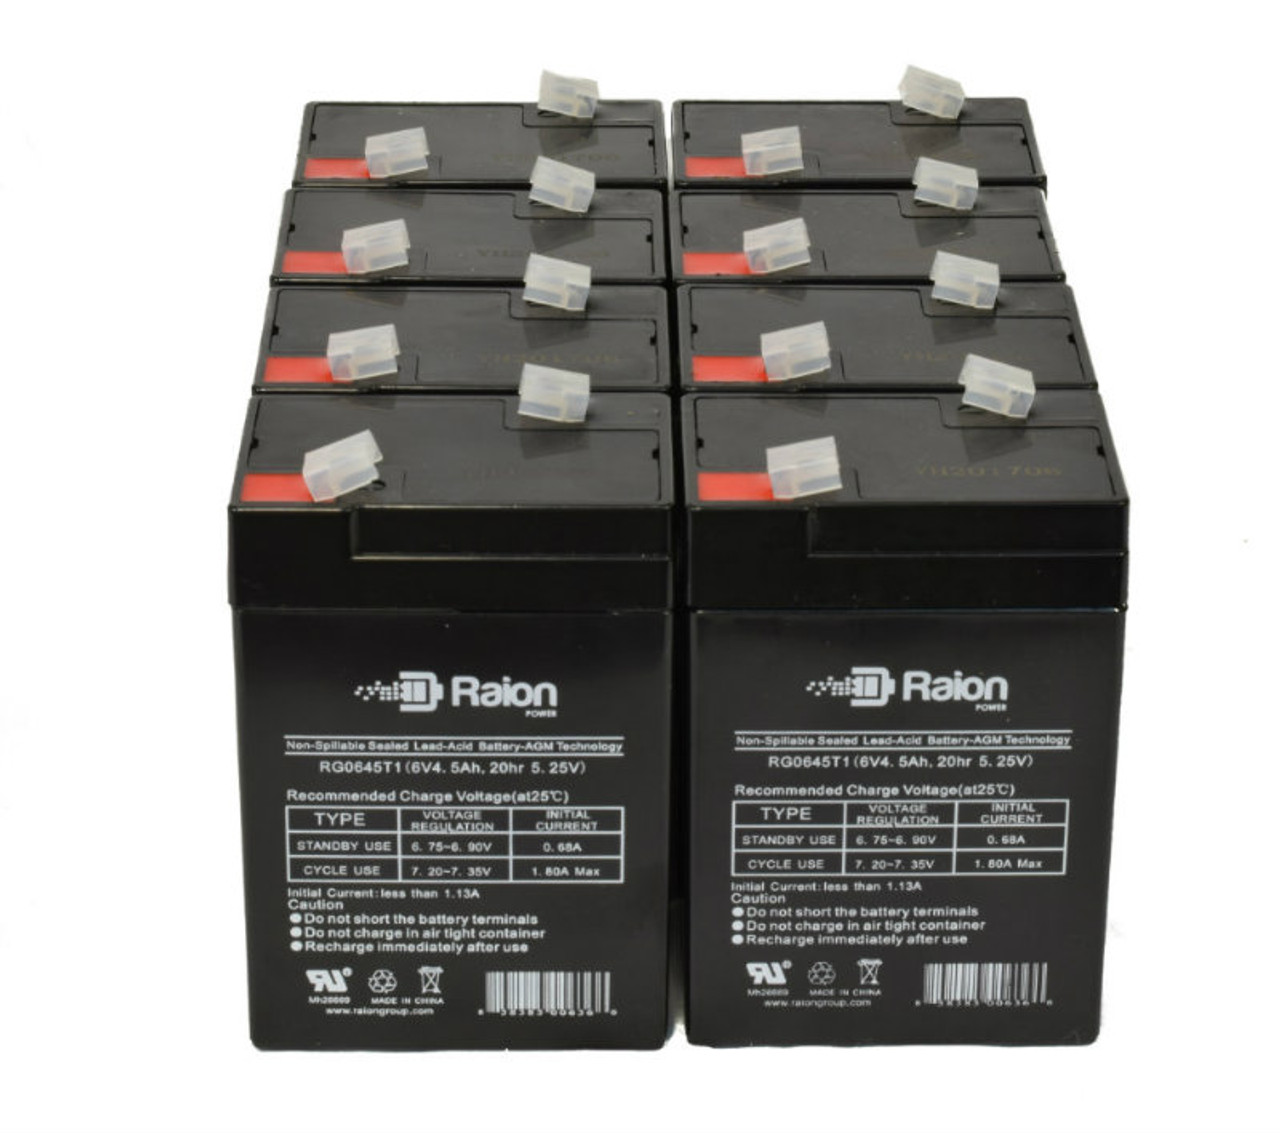 Raion Power 6 Volt 4.5Ah RG0645T1 Replacement Battery for GS Portalac PE6V4.5F1 - 8 Pack